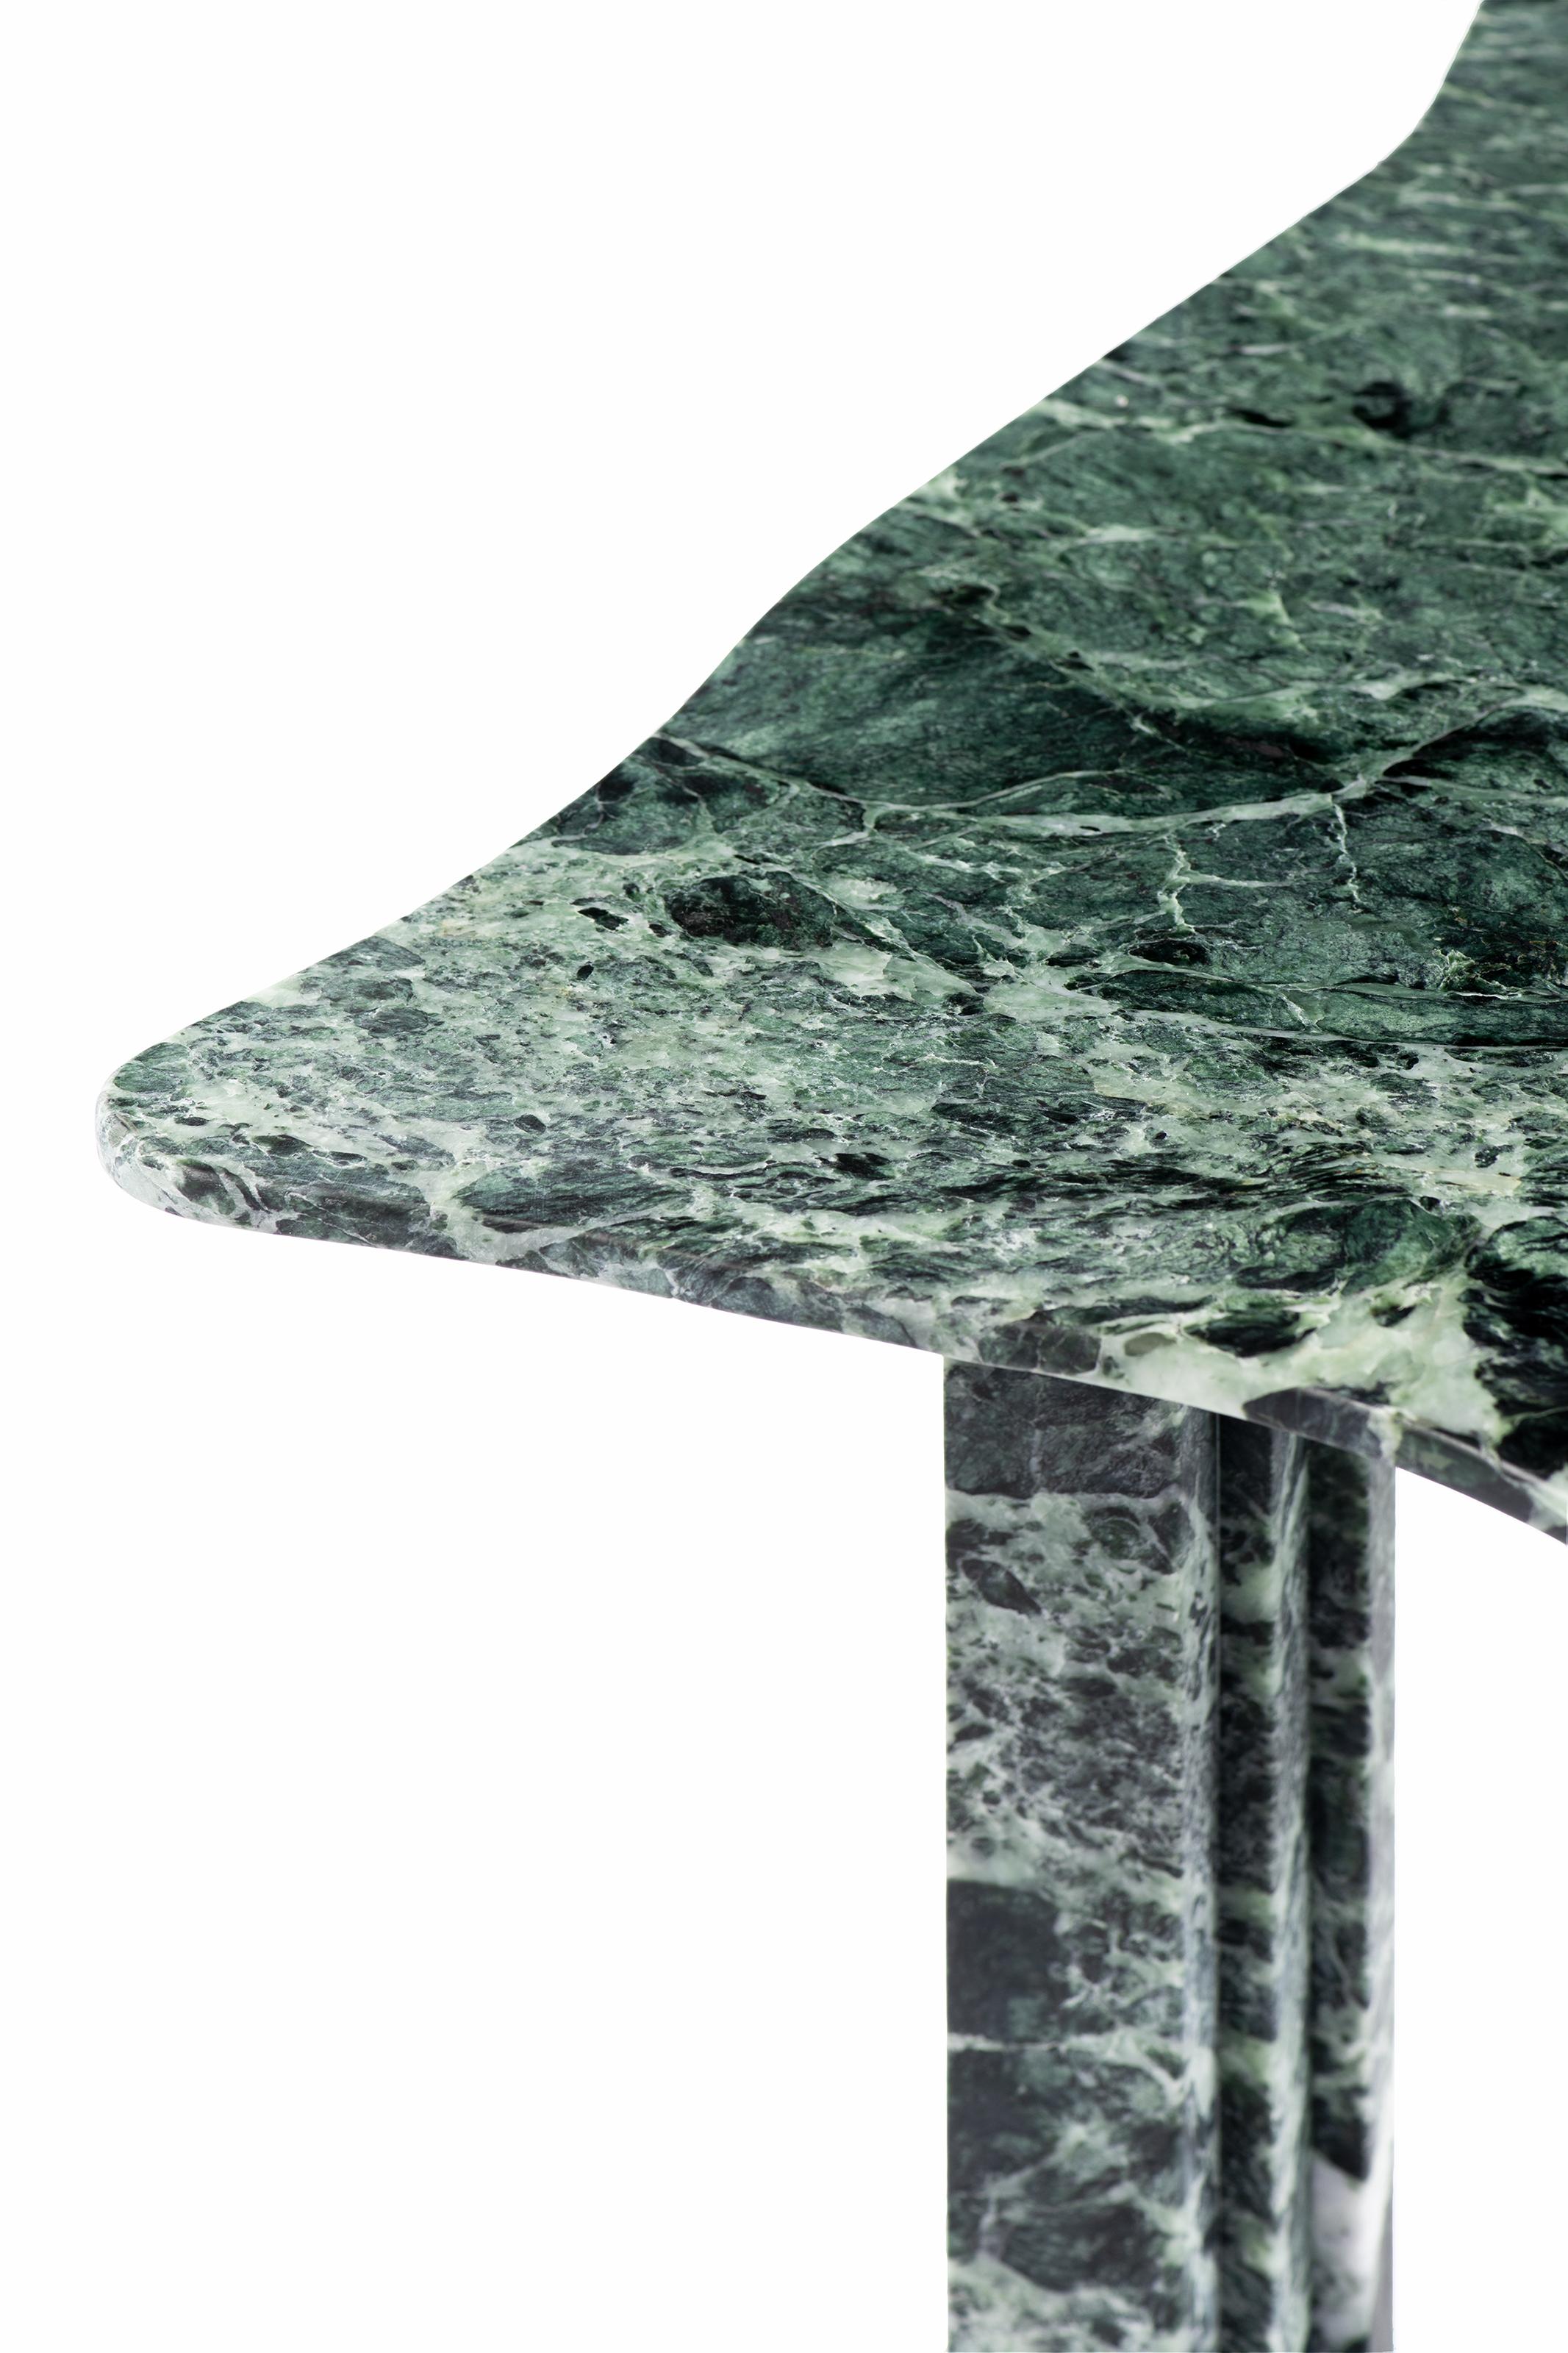 Sculptural green marble table - Lorenzo Bini

Title: No-thing

Measures:
- Dining table 180 x 150 x H 73.5 cm
- Coffee table 90 x 75 x H 37 cm

Material: Verde Alpi


Six Tableaux is a series of marble tables designed by Lorenzo Bini and